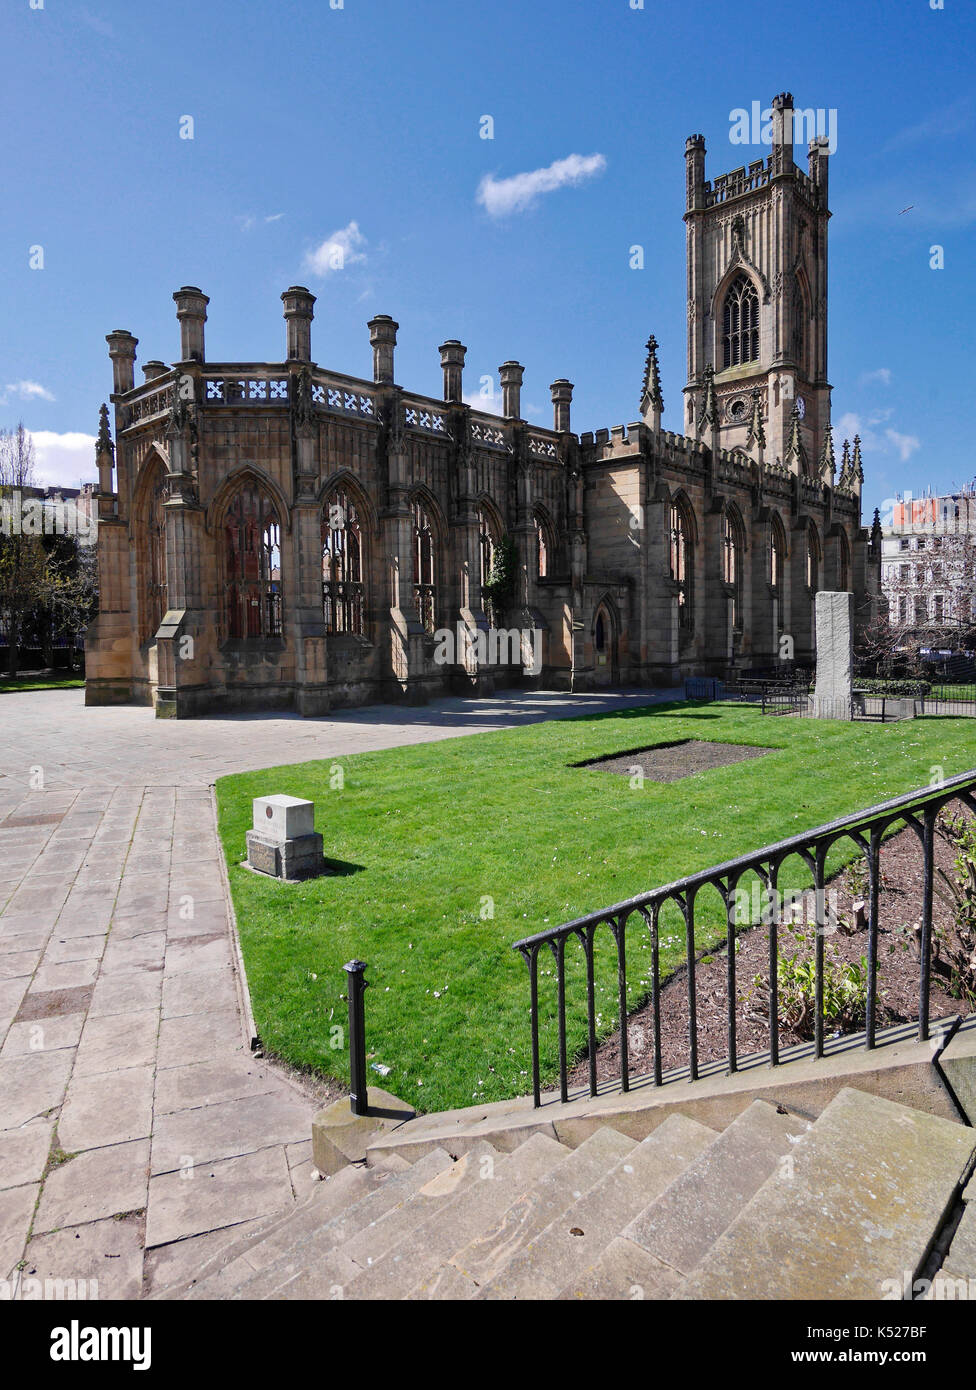 St Lukes, the bombed-out church, Liverpool city centre. Built between 1811-1832 by John Foster Snr and son. Gutted in 1941 blitz. Now a war memorial. Stock Photo